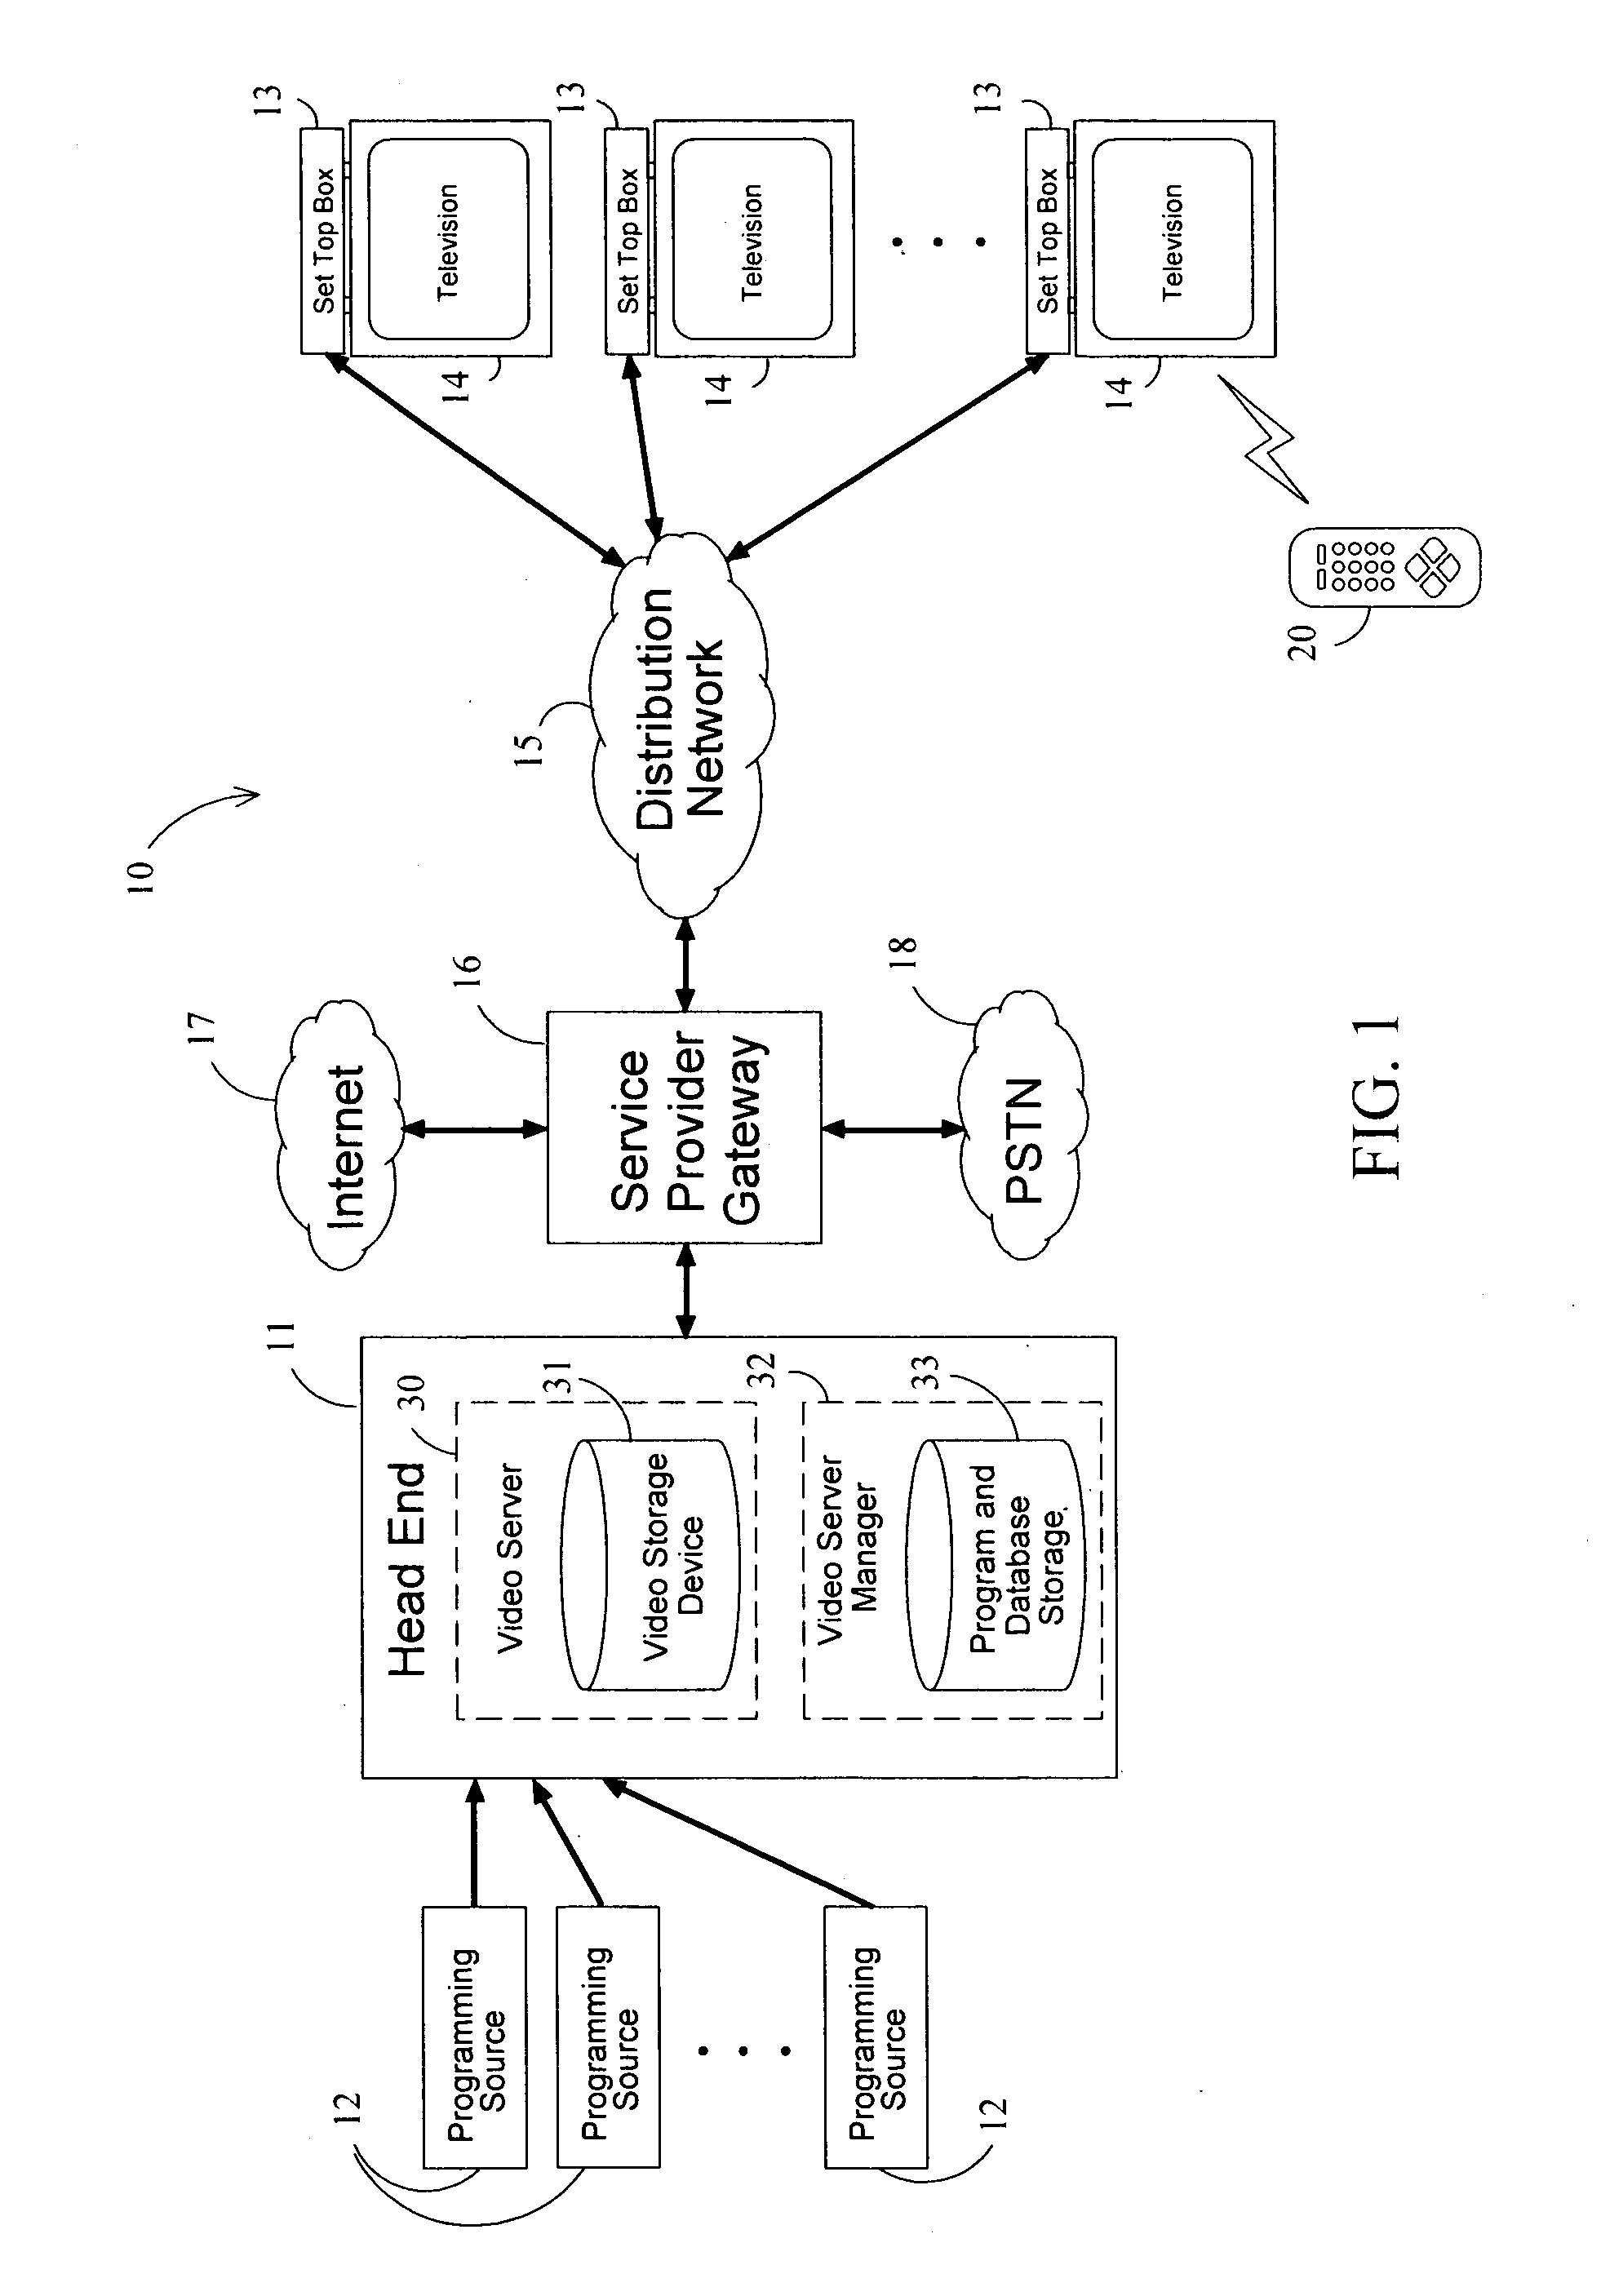 Media content modification and access system for interactive access of media content across disparate network platforms